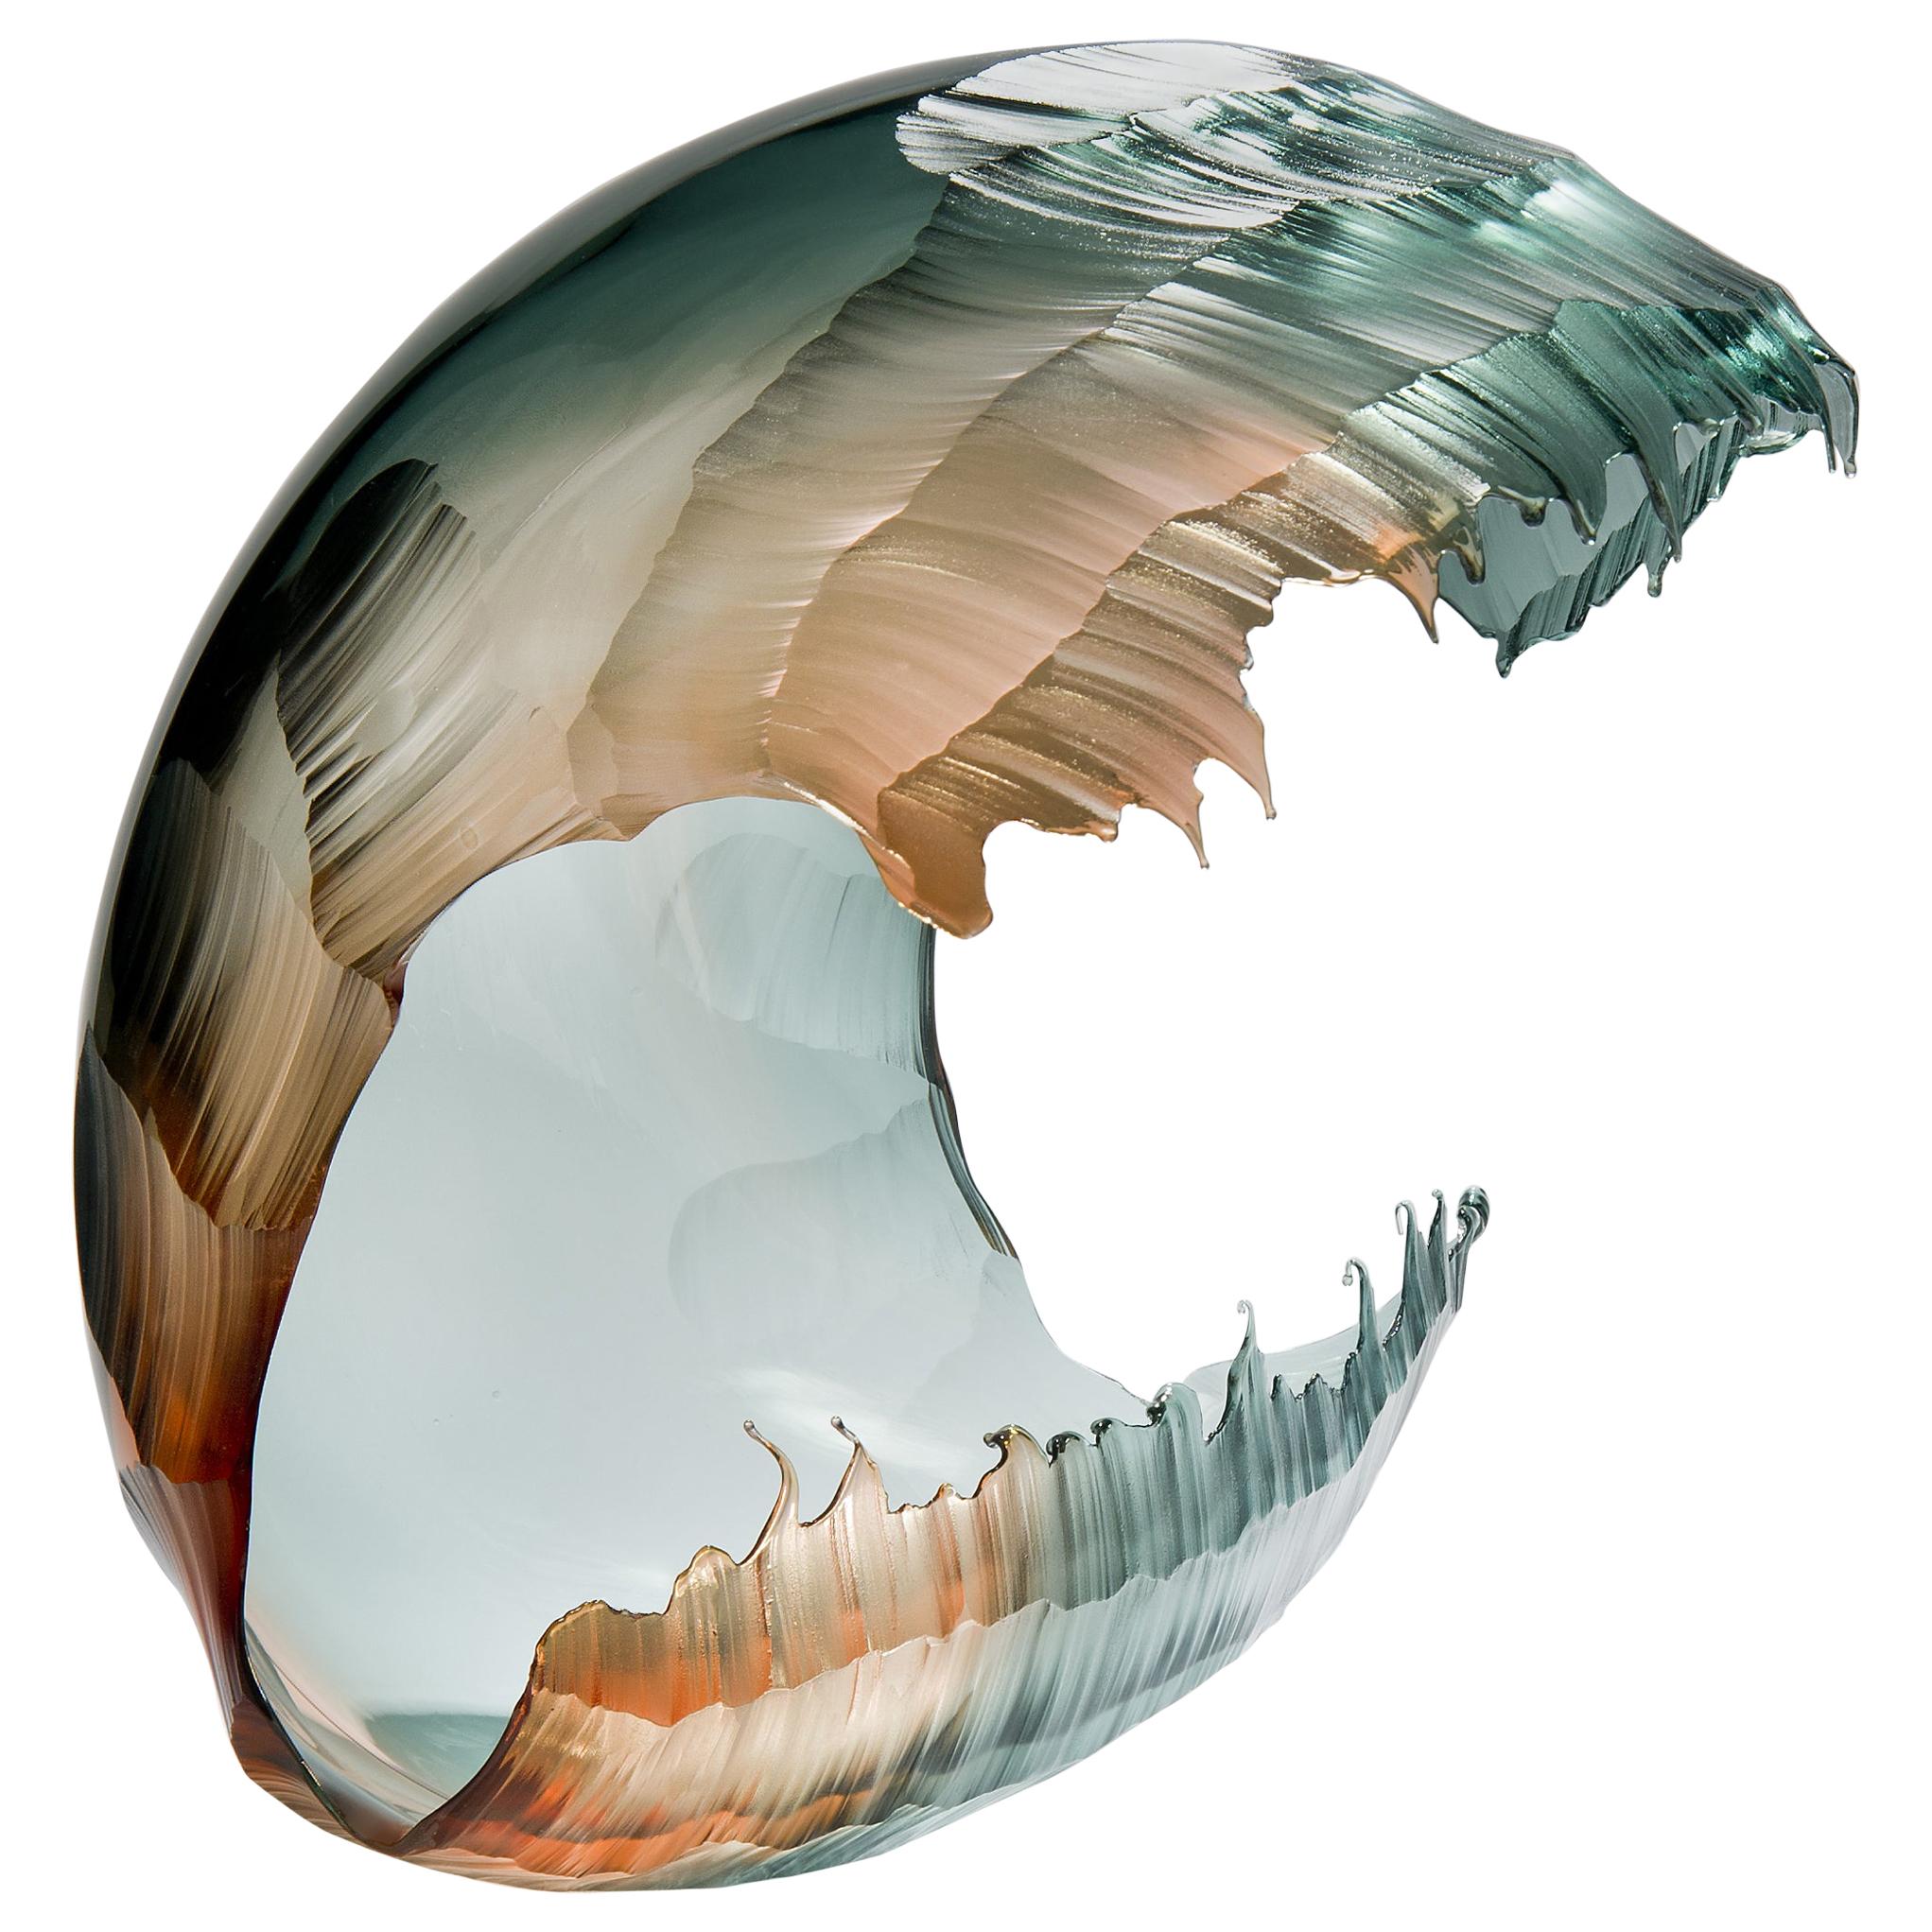 North Sea Morning Wave Form, a Teal & Apricot Glass Sculpture by Graham Muir